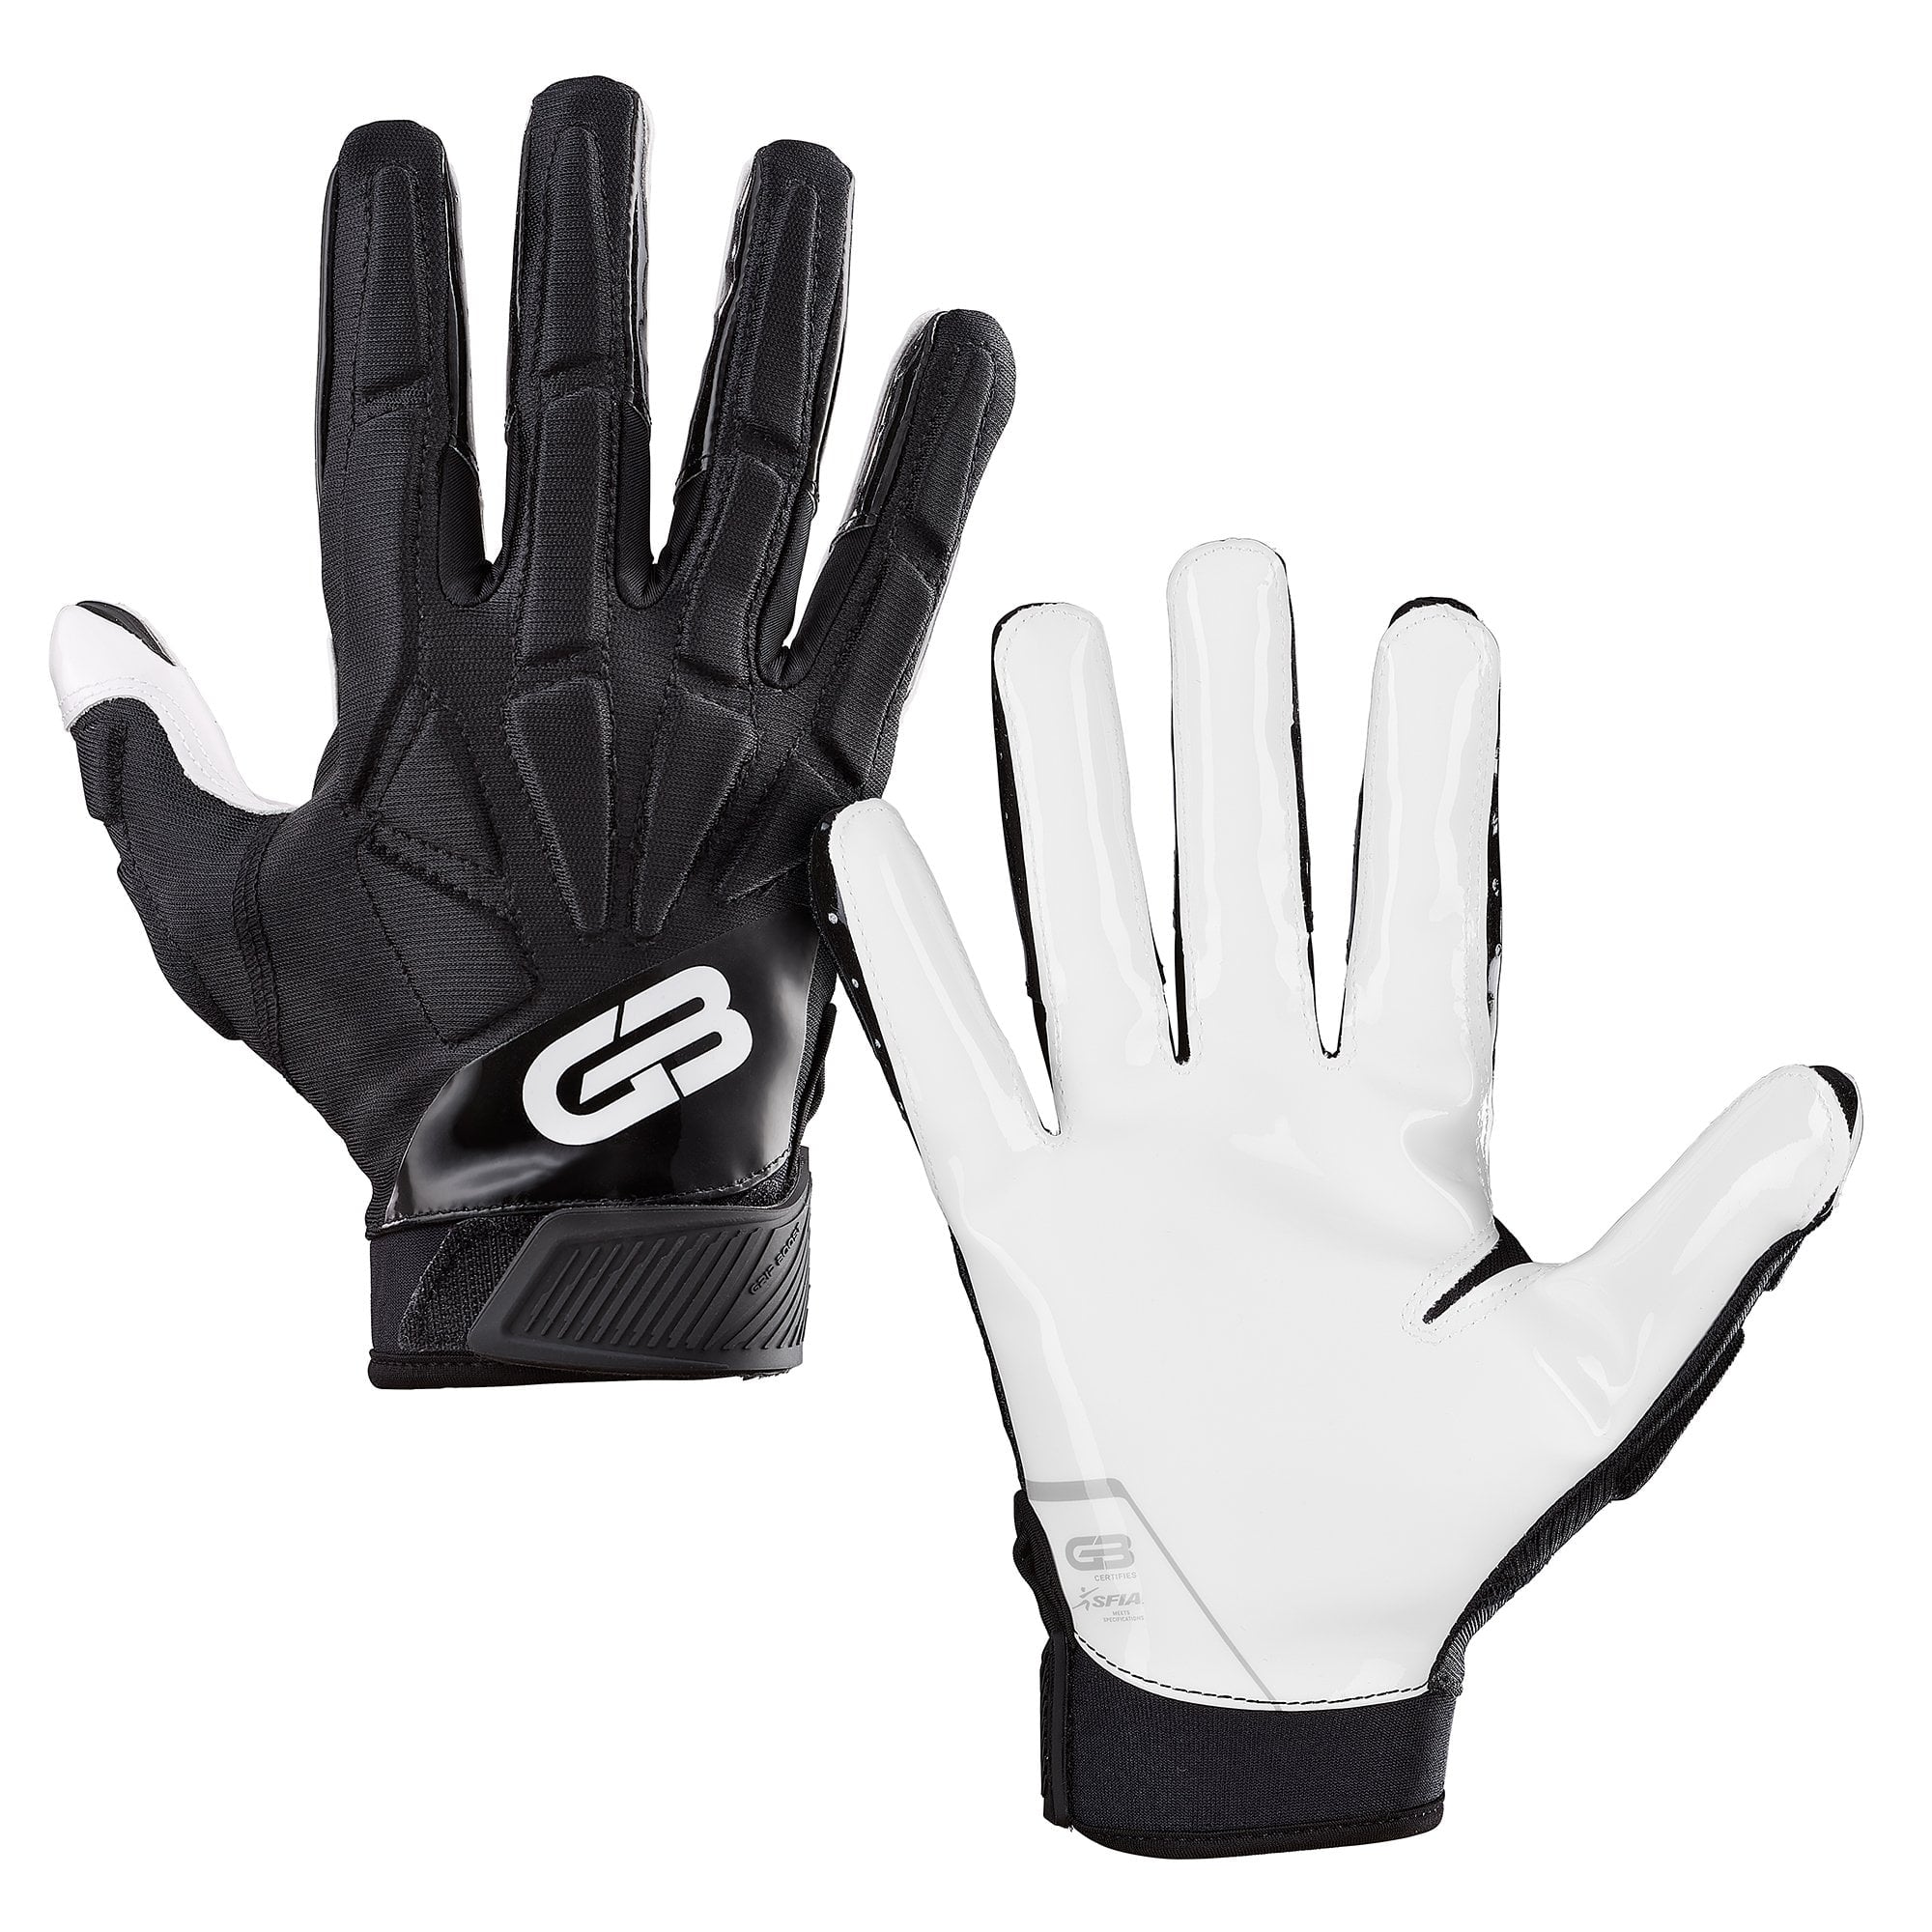 Grip Boost Peace Football Gloves Pro Elite - Adult Sizes